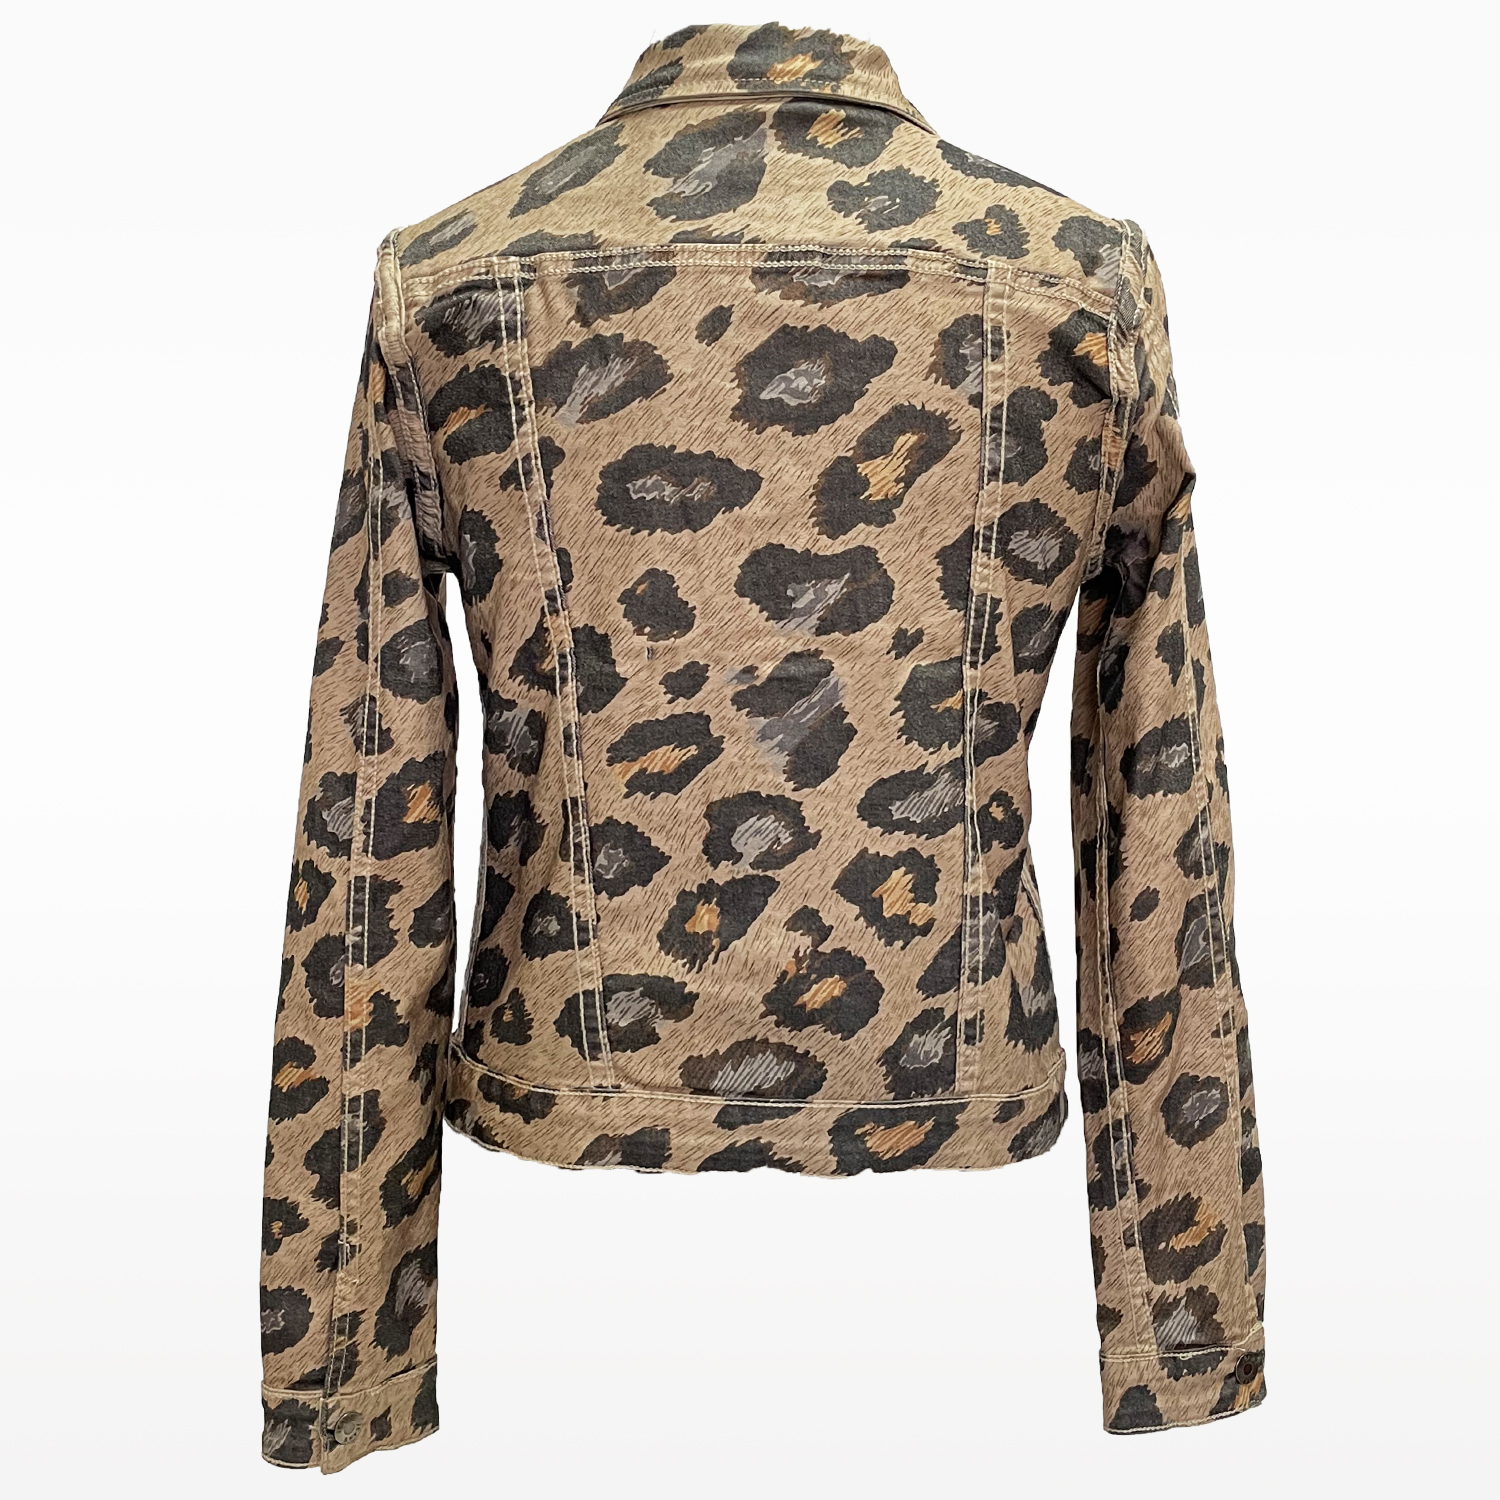 MADE IN ITALY LEOPARD PRINT REVERSIBLE JACKET | Rosella - Style ...